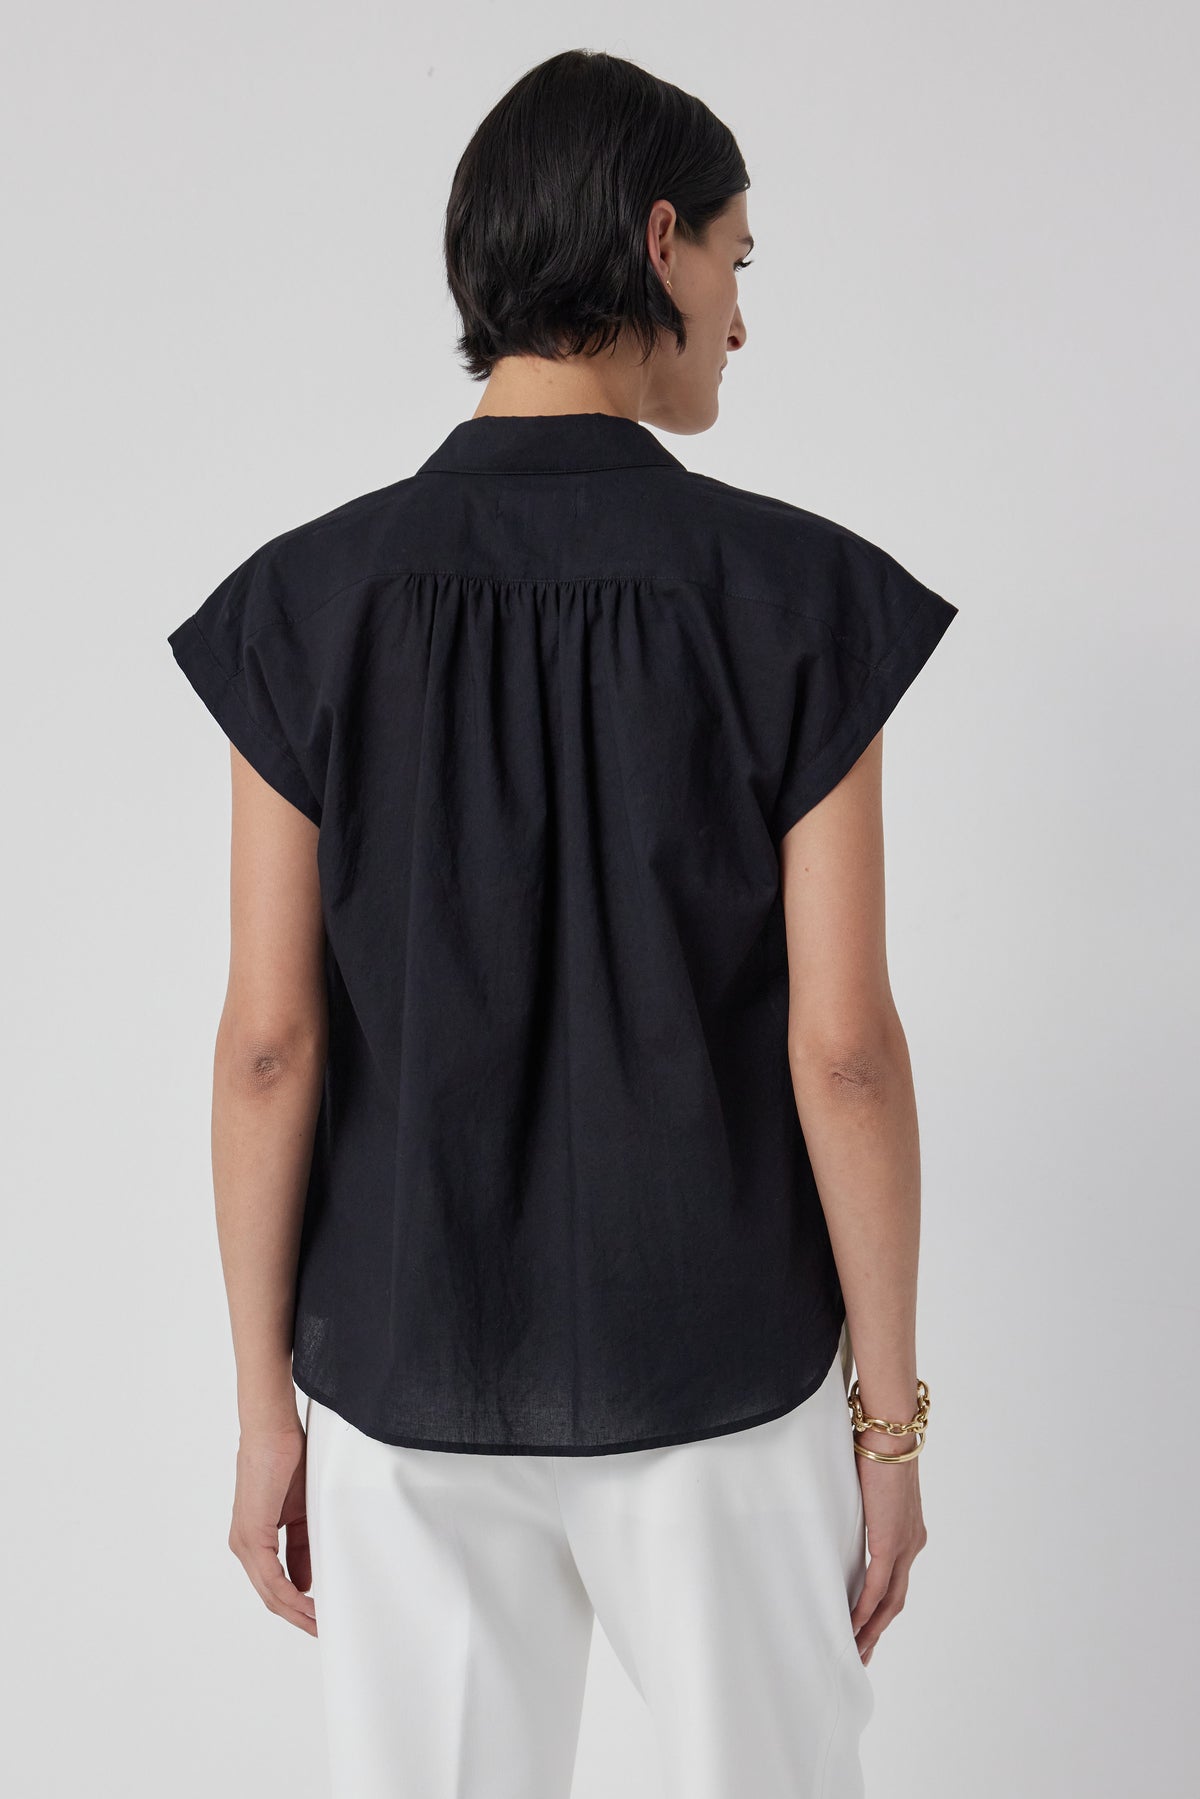 The back view of a woman wearing a black PALISADES SHIRT by Velvet by Jenny Graham and white pants.-36168709701825